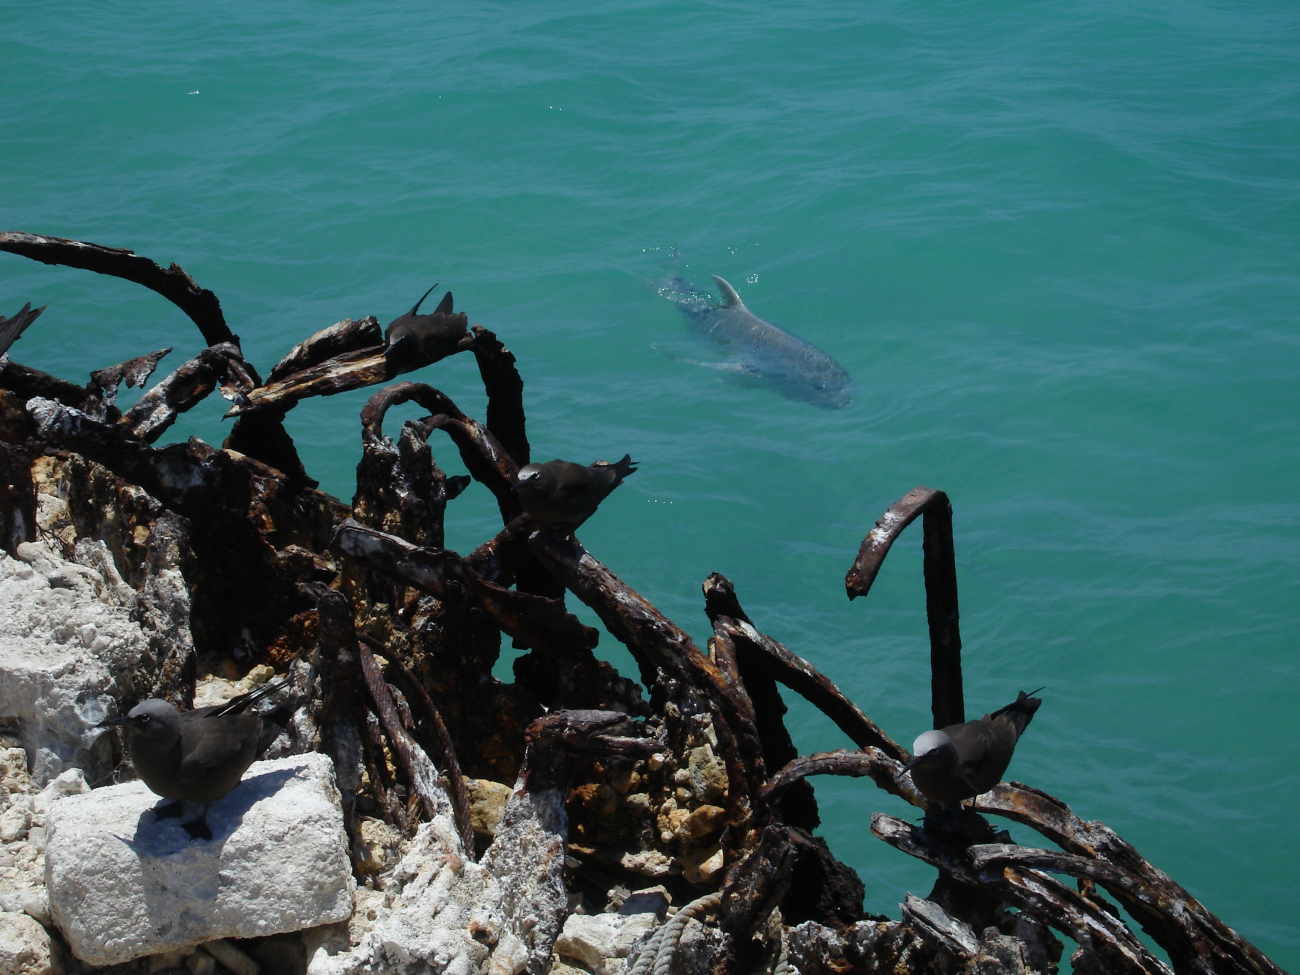 Ulua swimming by the remains of a concrete structure